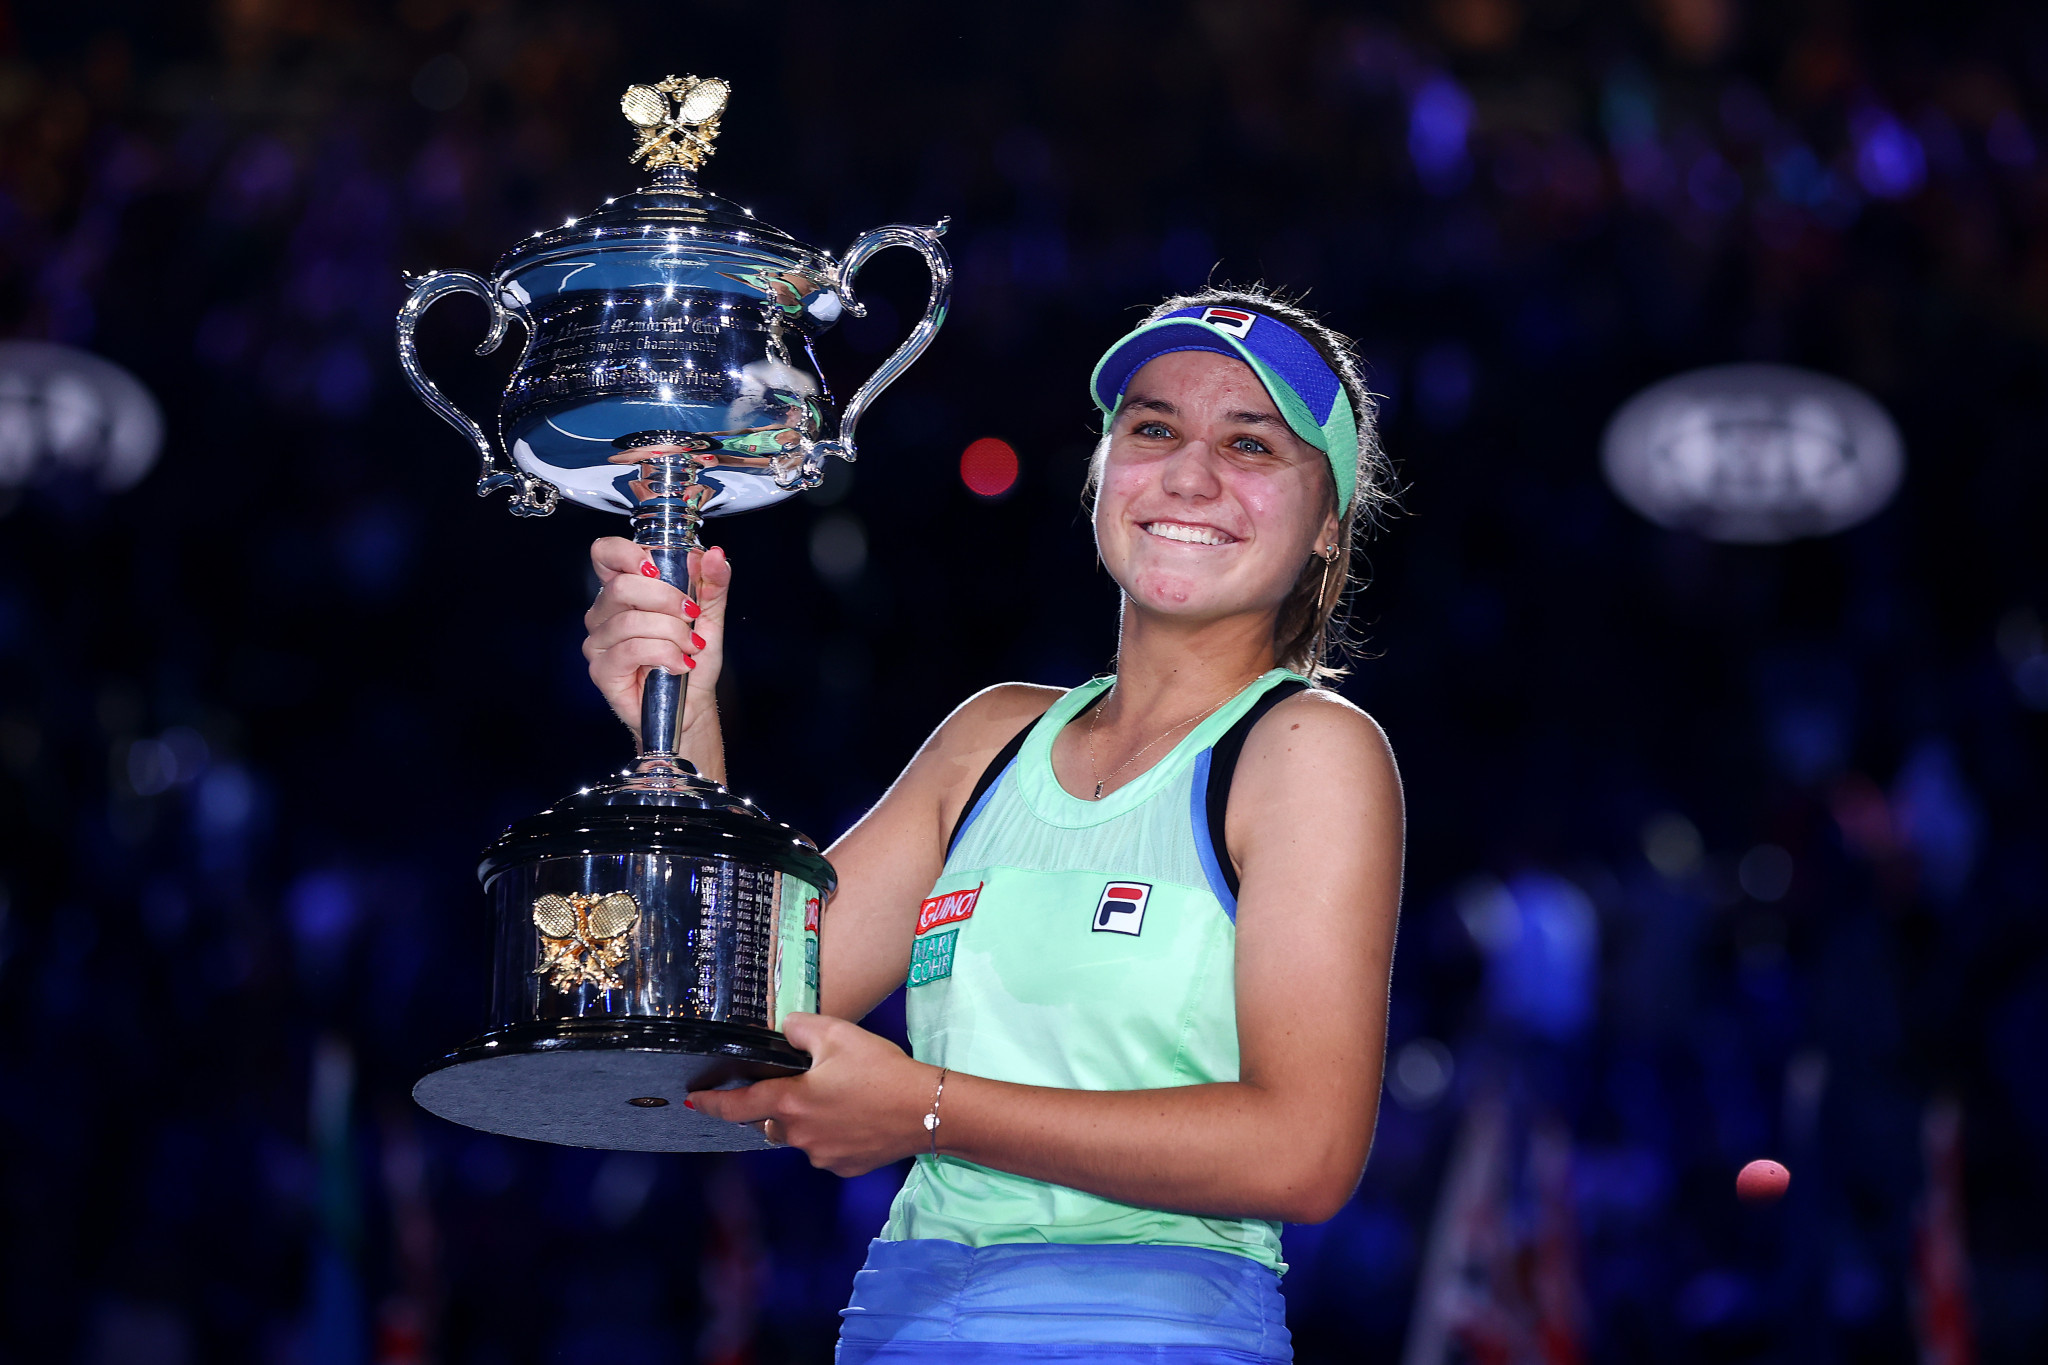 Women’s qualification event for Australian Open moved to Dubai as WTA confirms start-of-season schedule